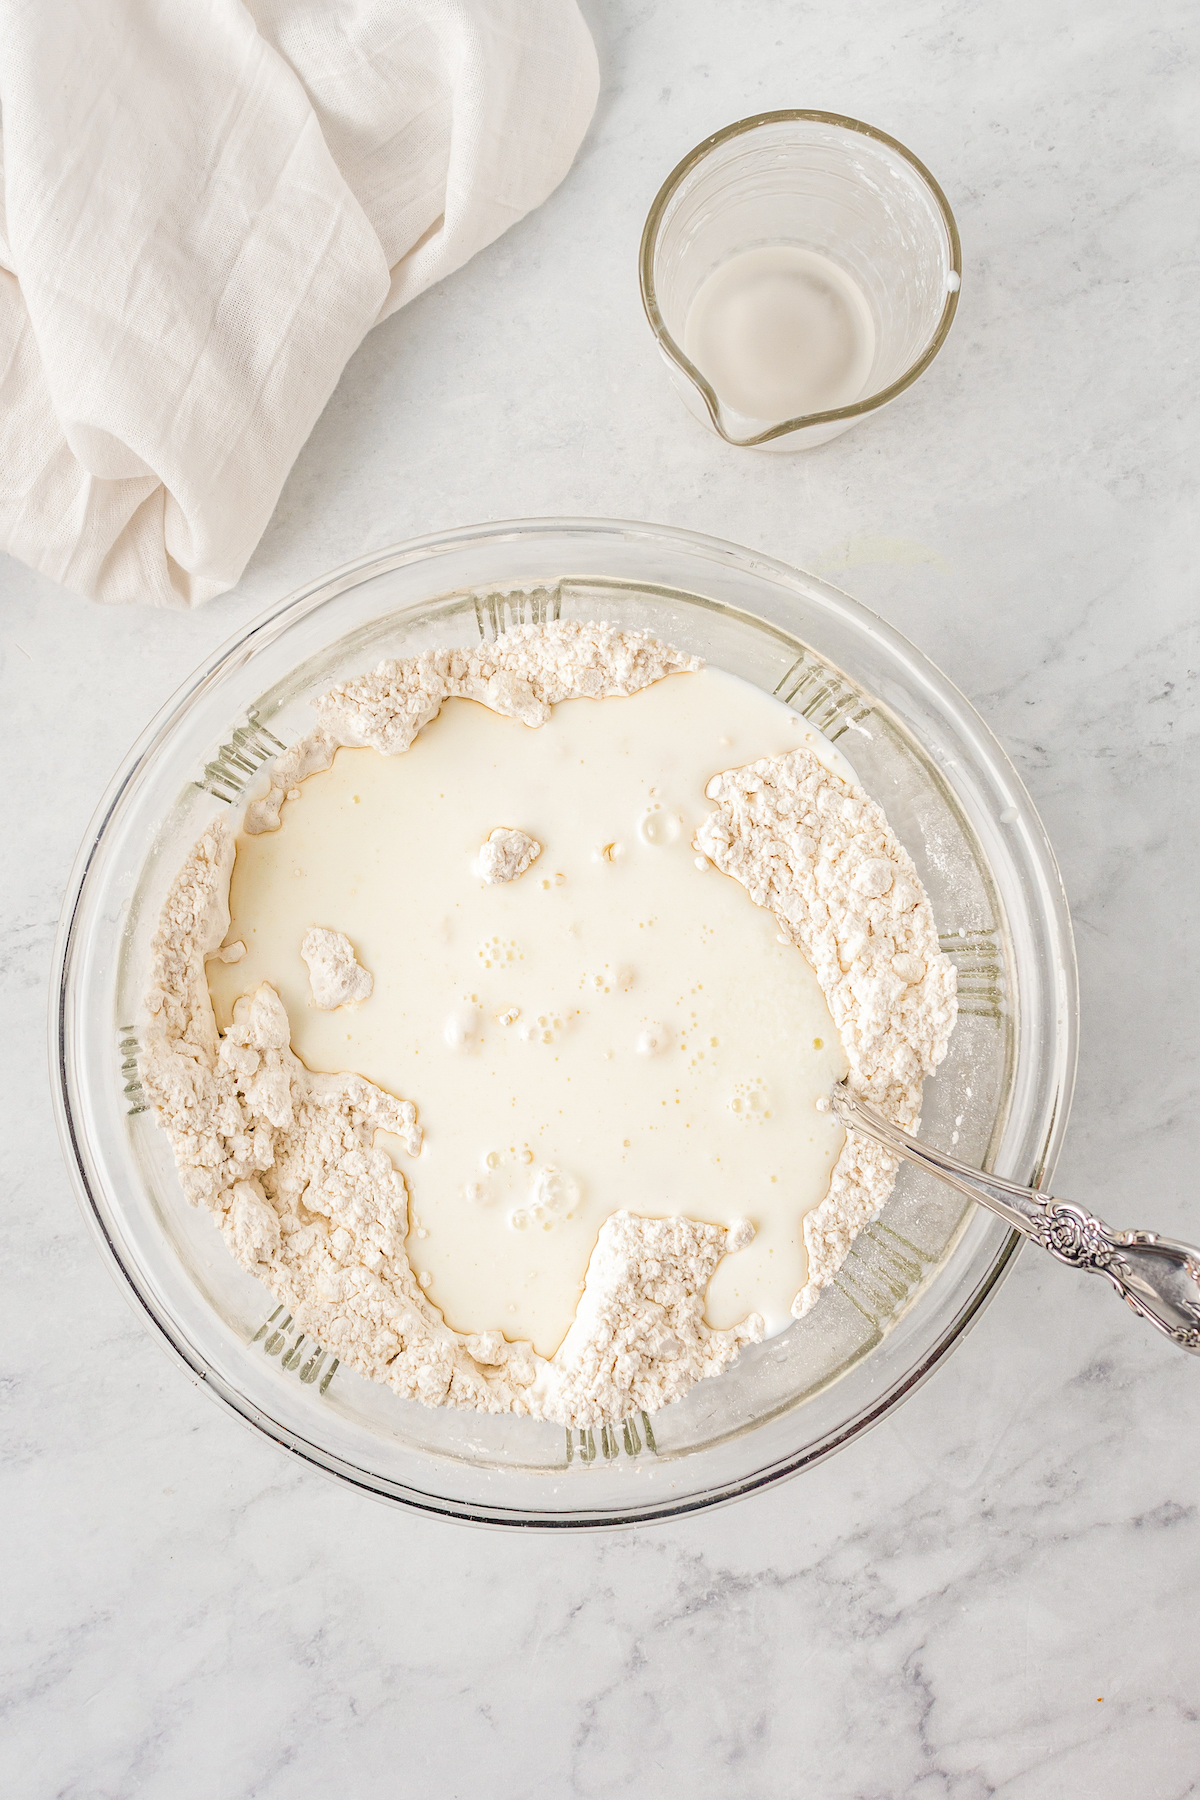 Buttermilk poured over dry baking ingredients in a glass bowl.